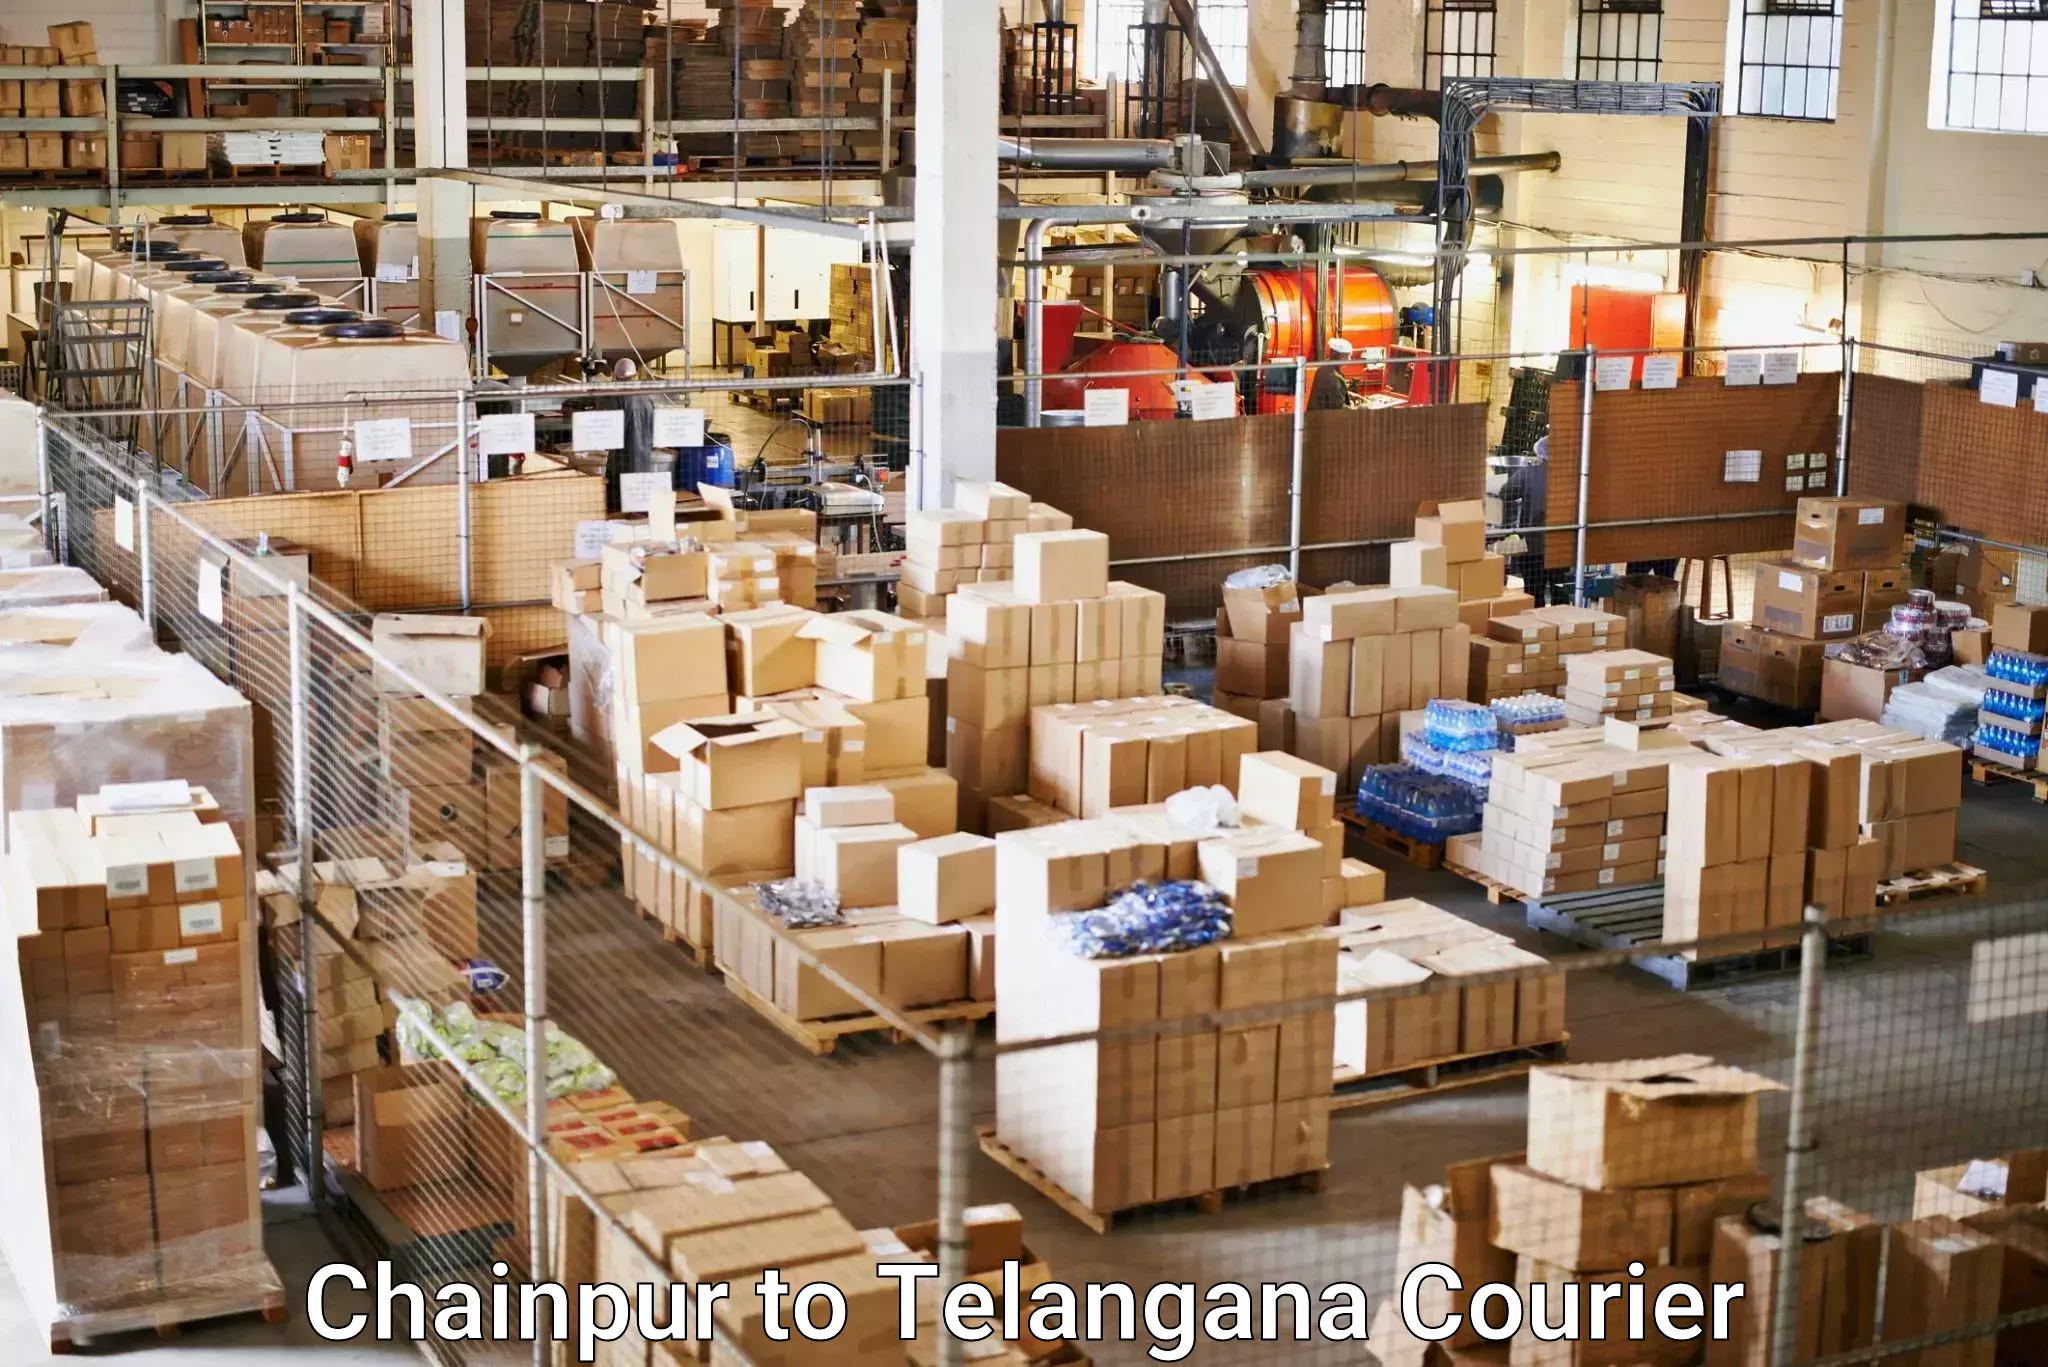 Professional delivery solutions Chainpur to Gangadhara